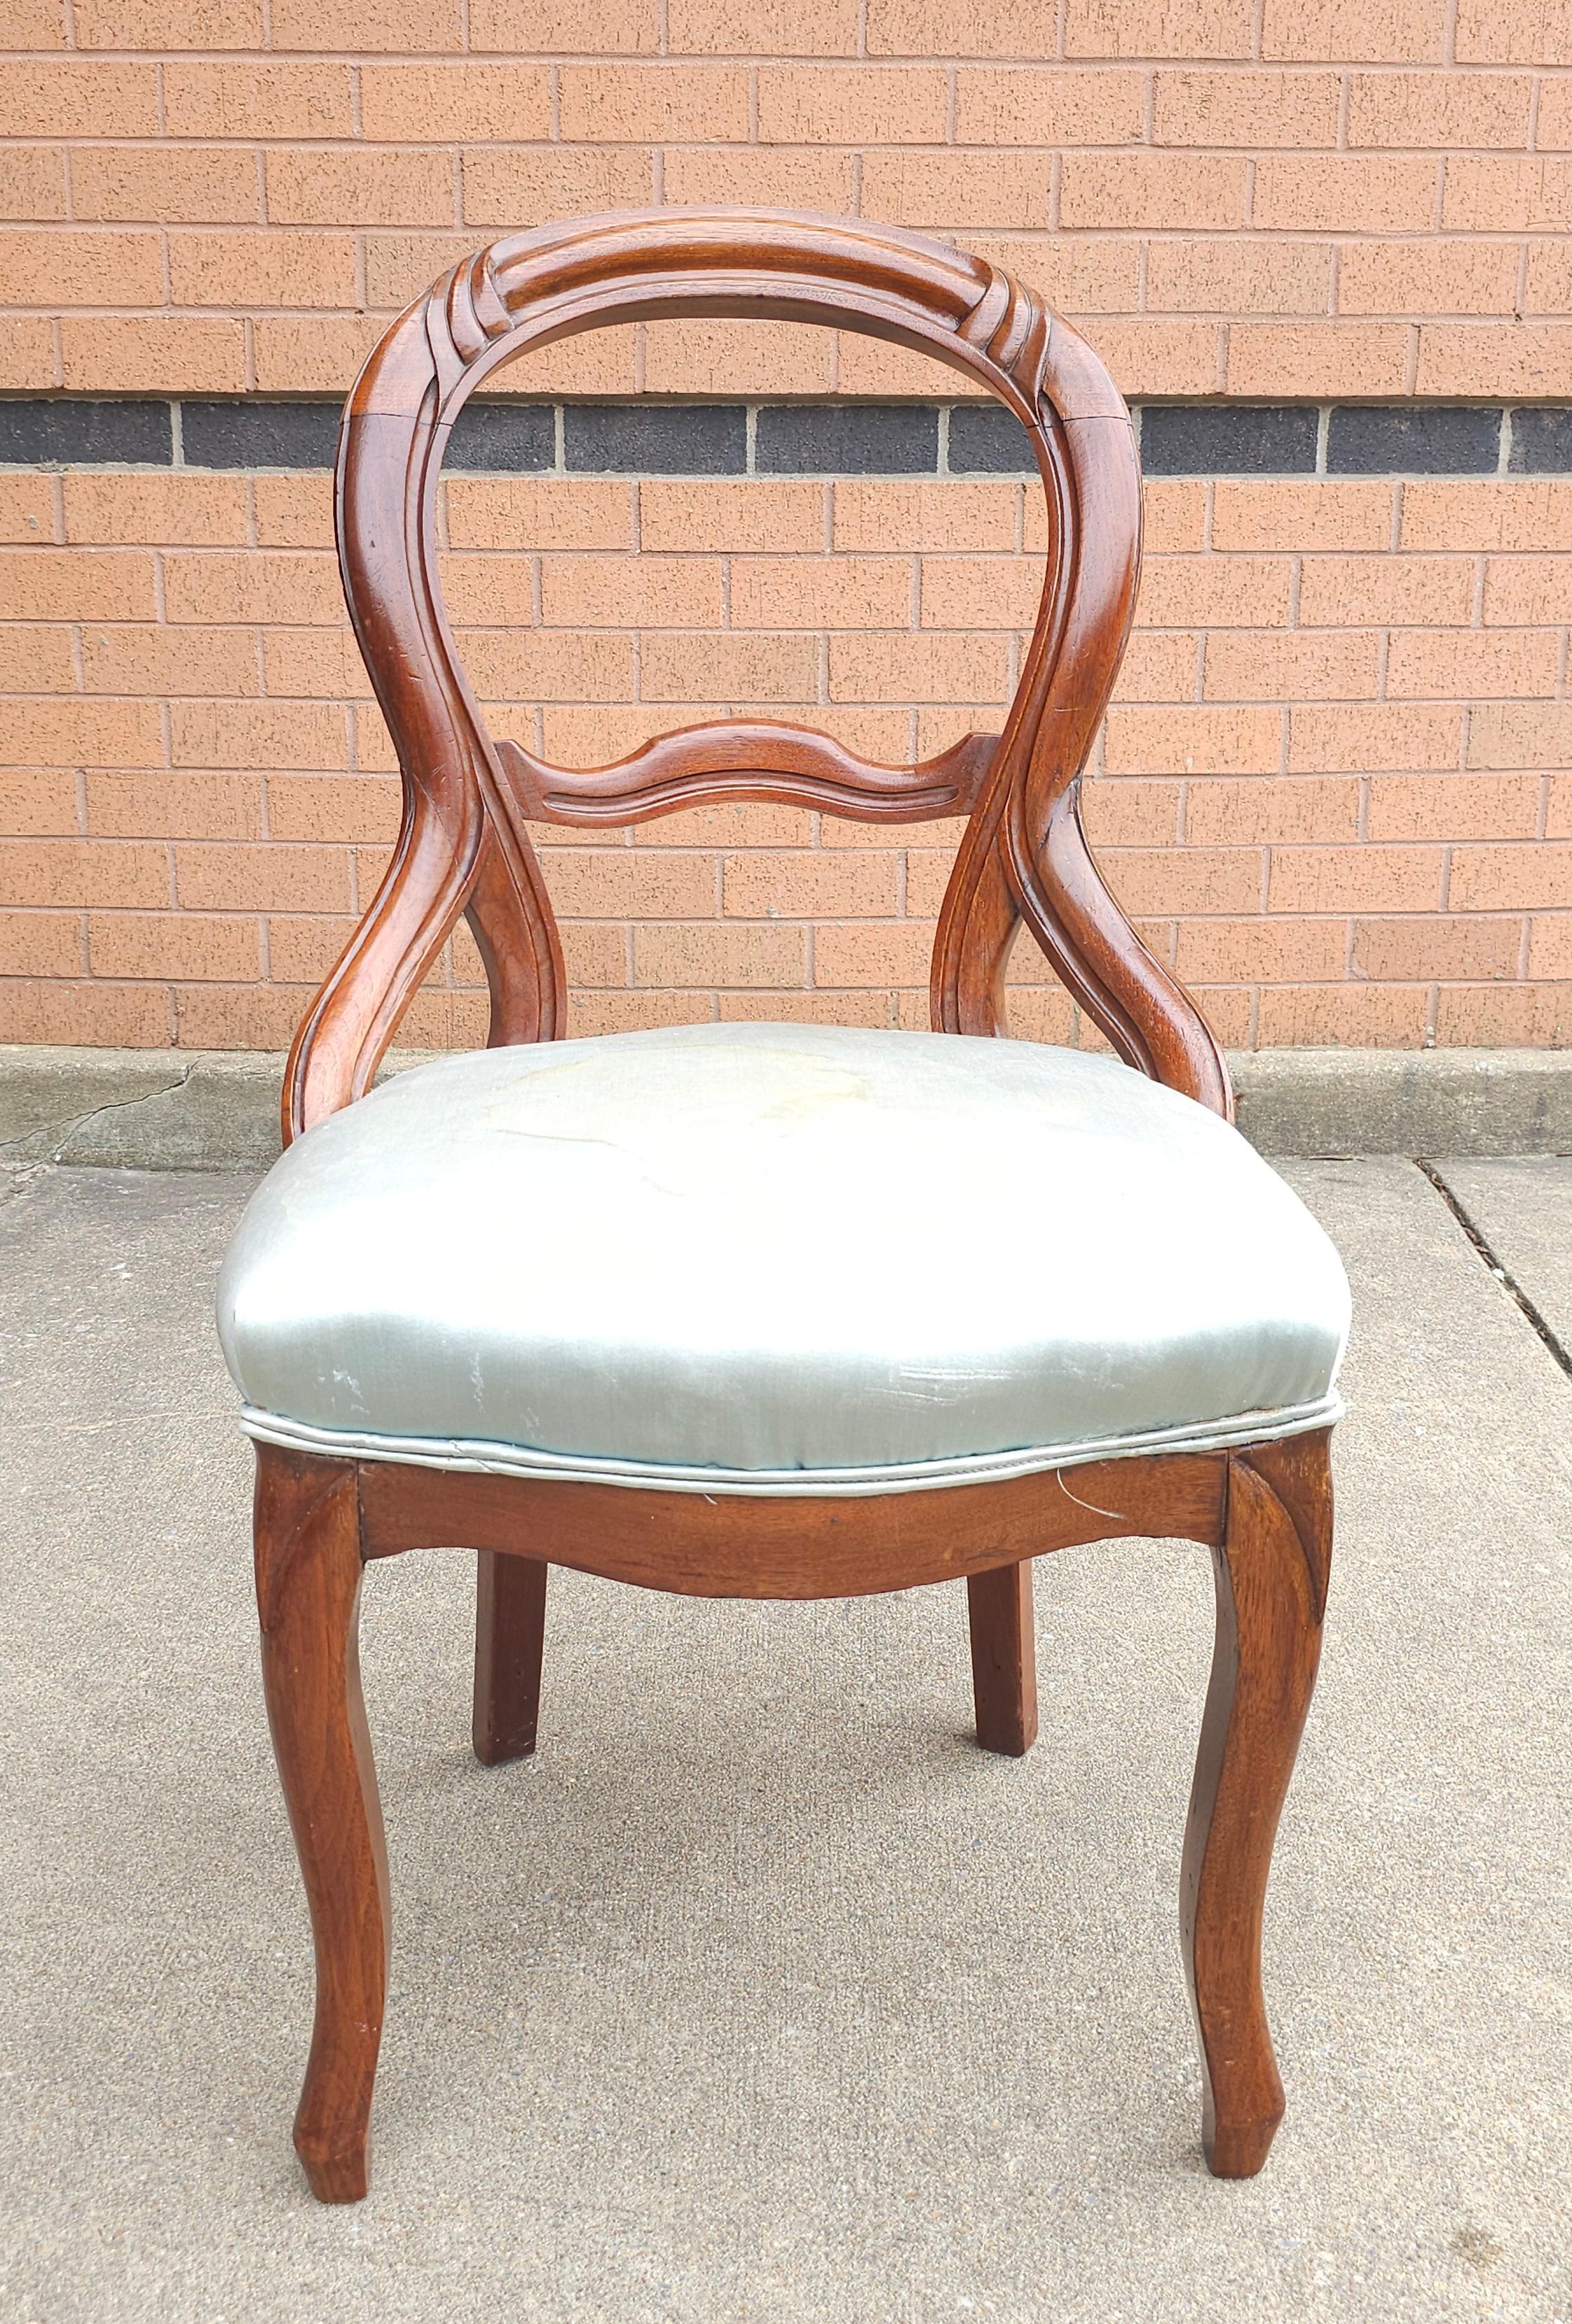 Upholstery 19th Century Victorian Carved Magogany and Upholstered Chair For Sale